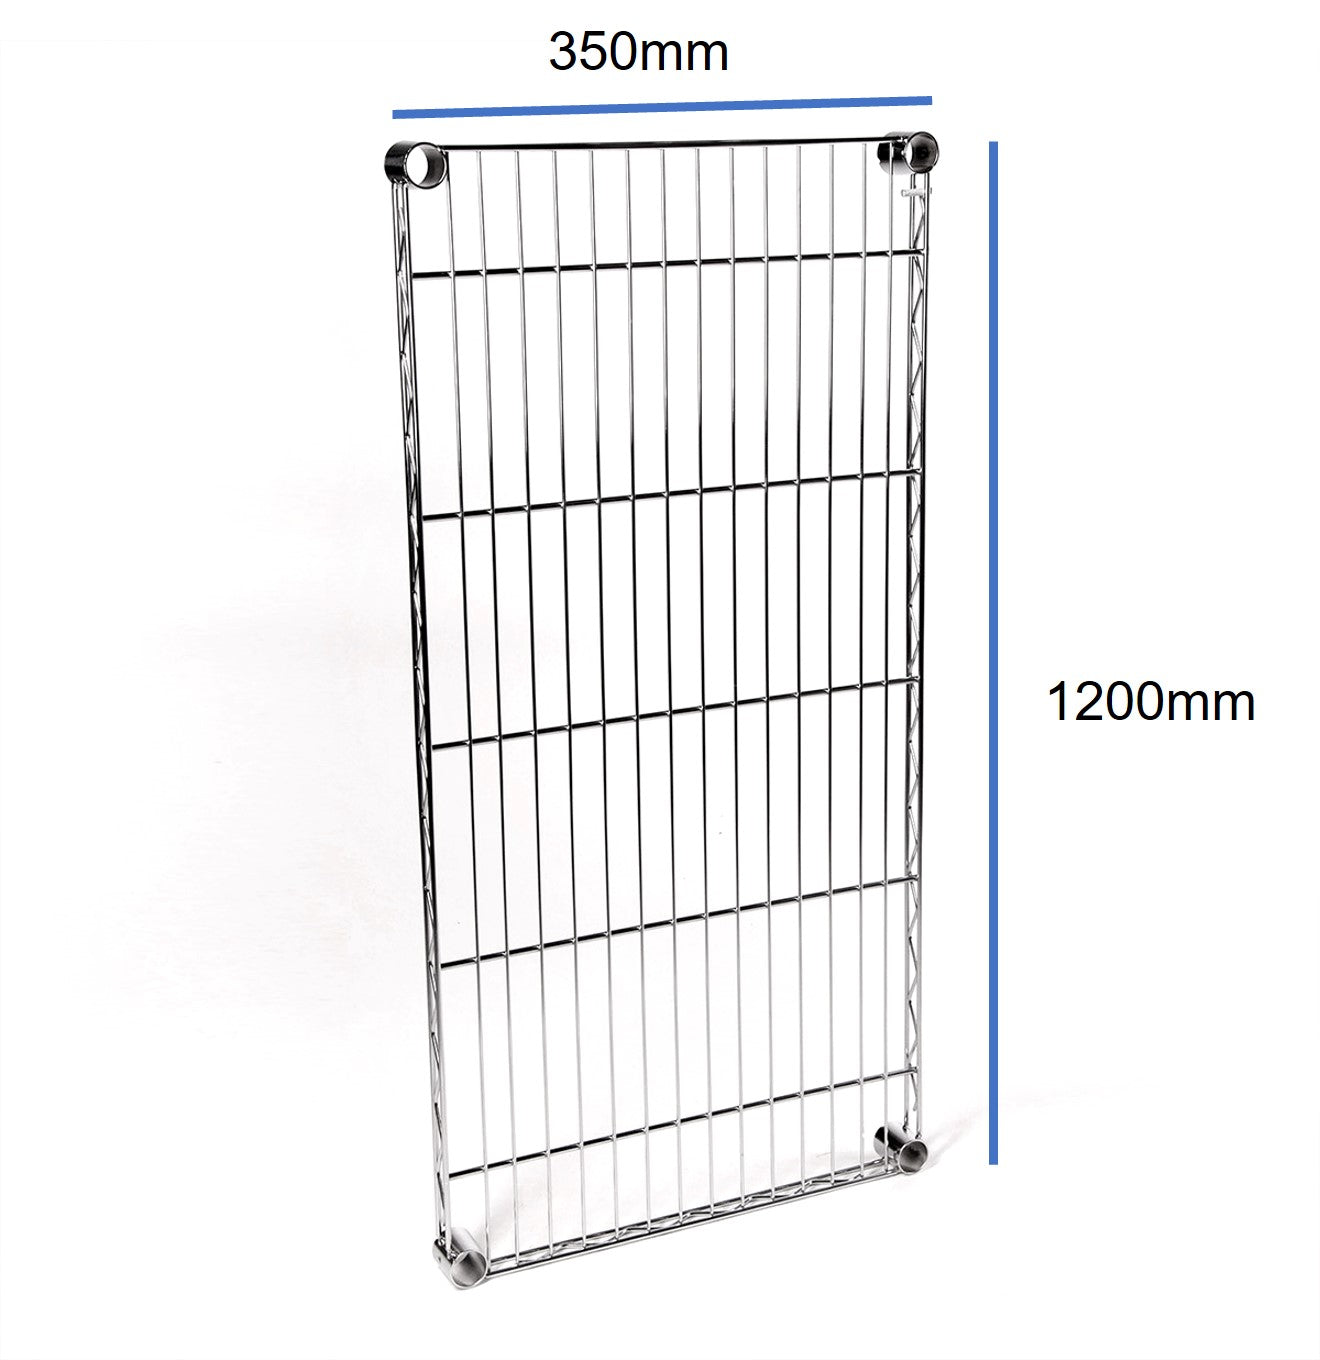 Sets with 1200mm x 350mm Shelves